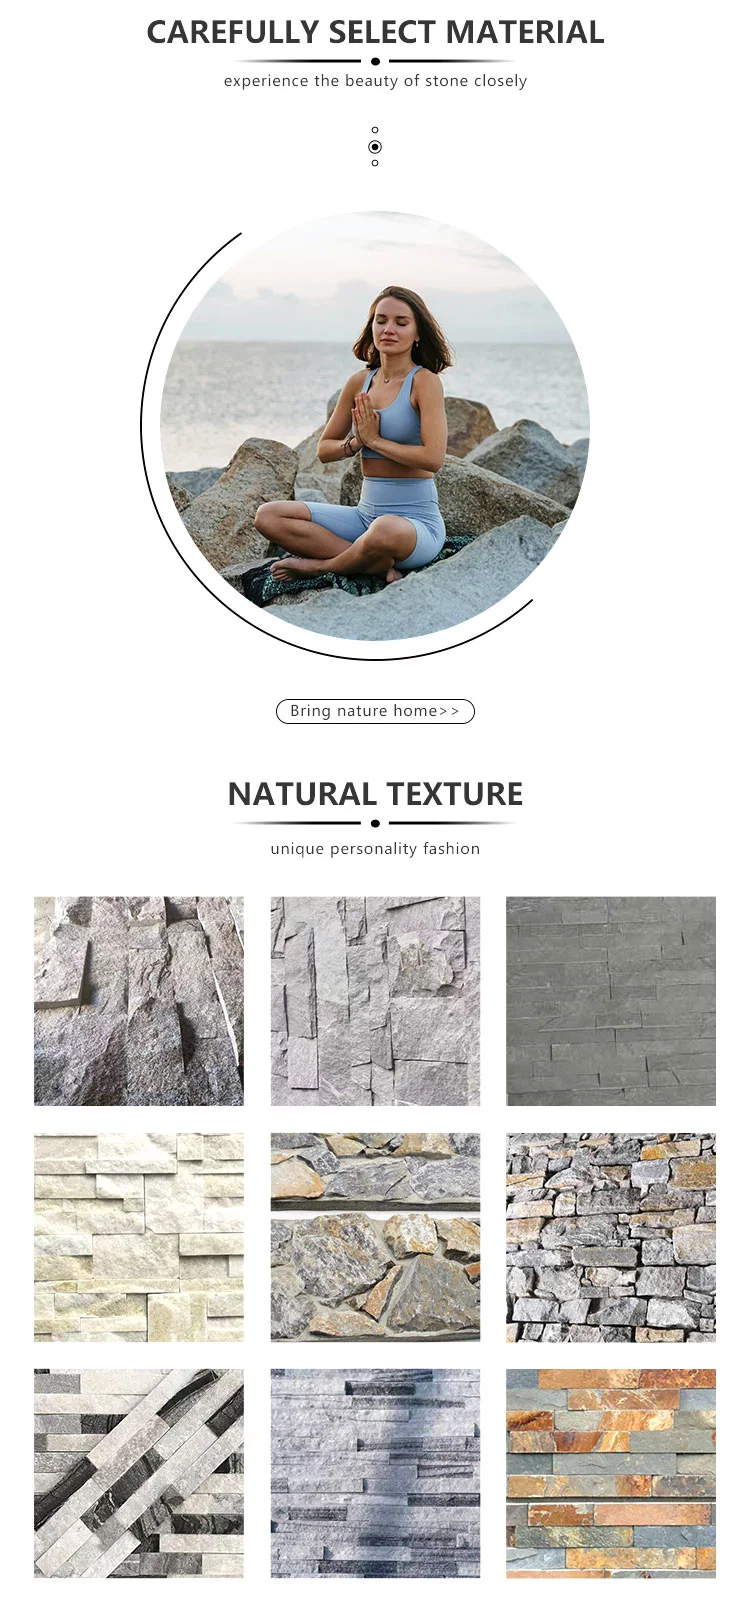 Blve Luxury Outdoor Natural Stone Material Marble Wall Tiles Culture Stone Wall Panel